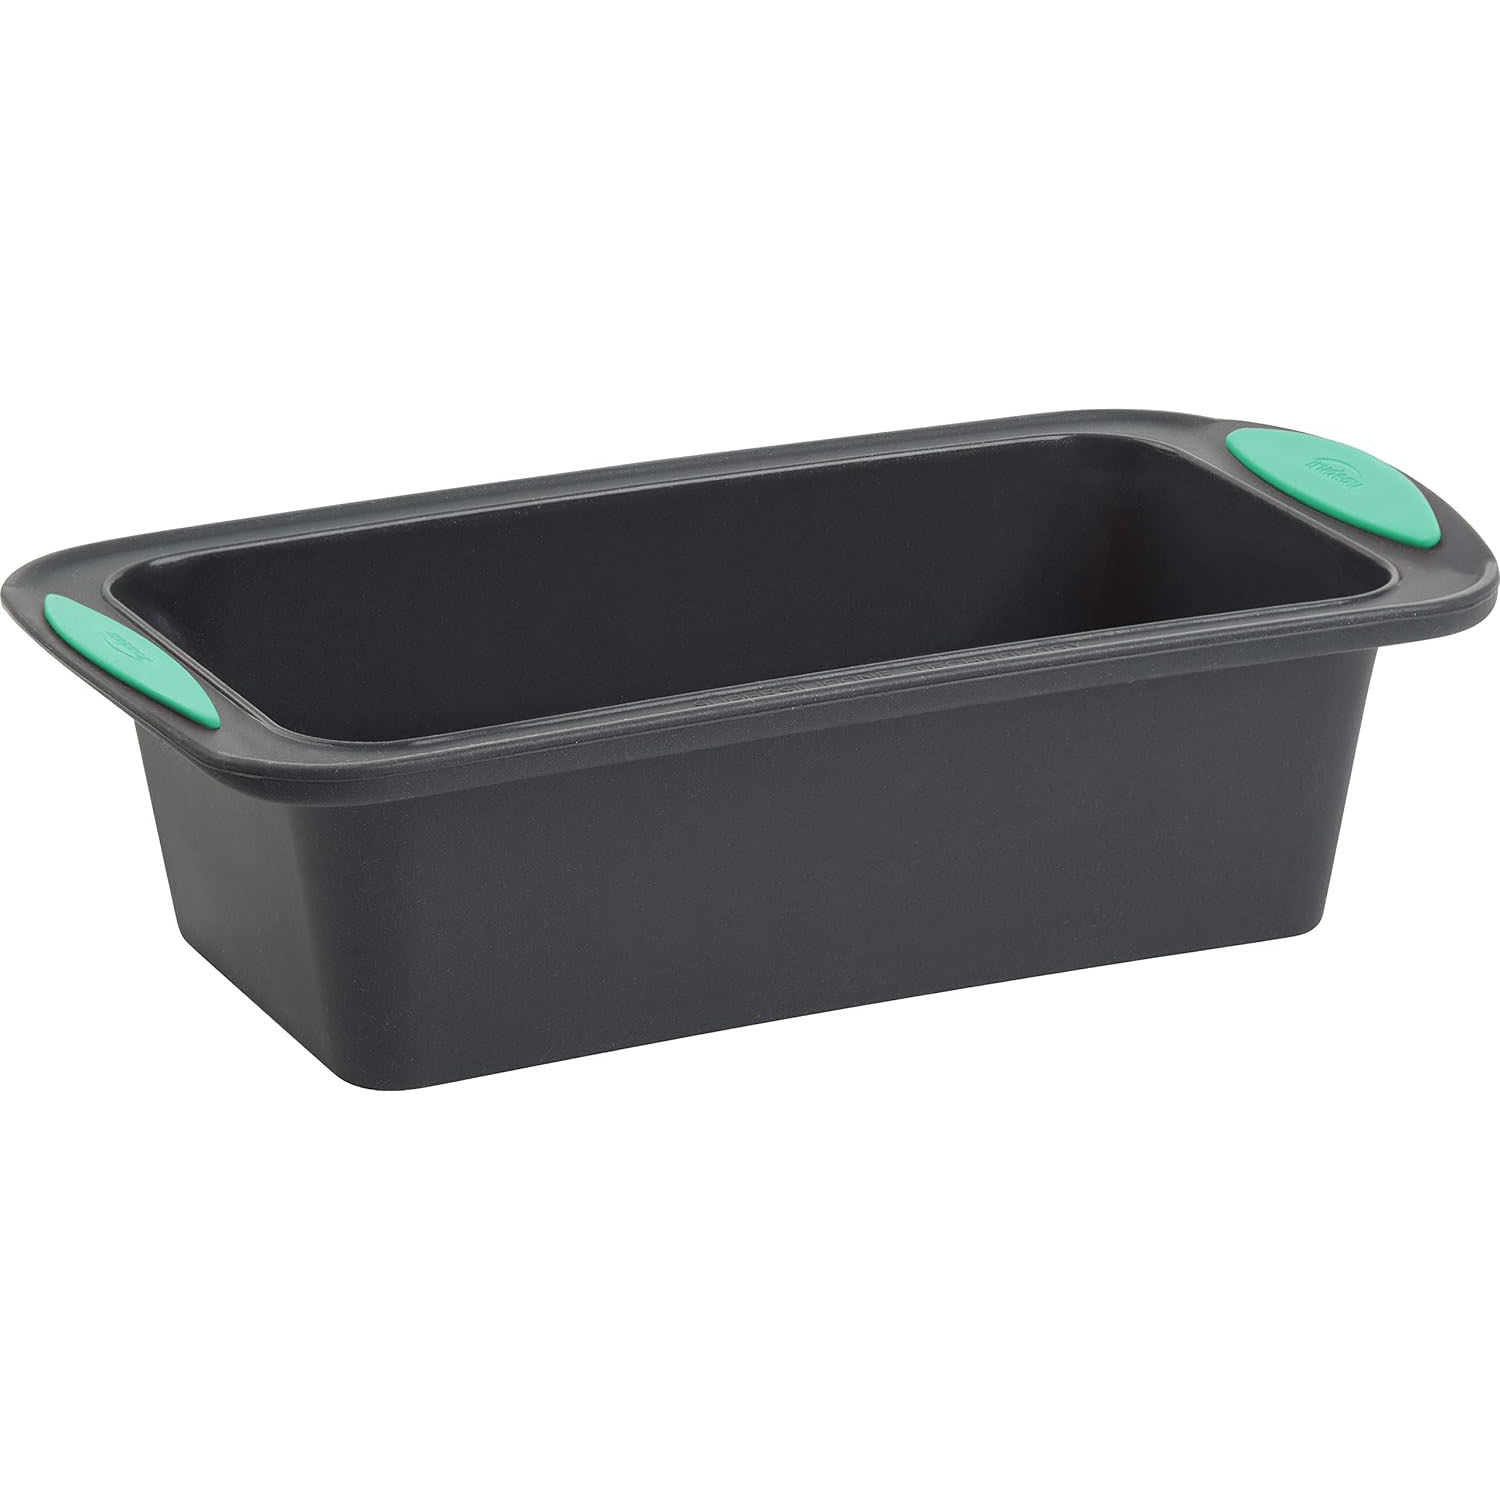 Trudeau Structure Loaf Pan Silicone Bakeware, 8.5" x 4.5"